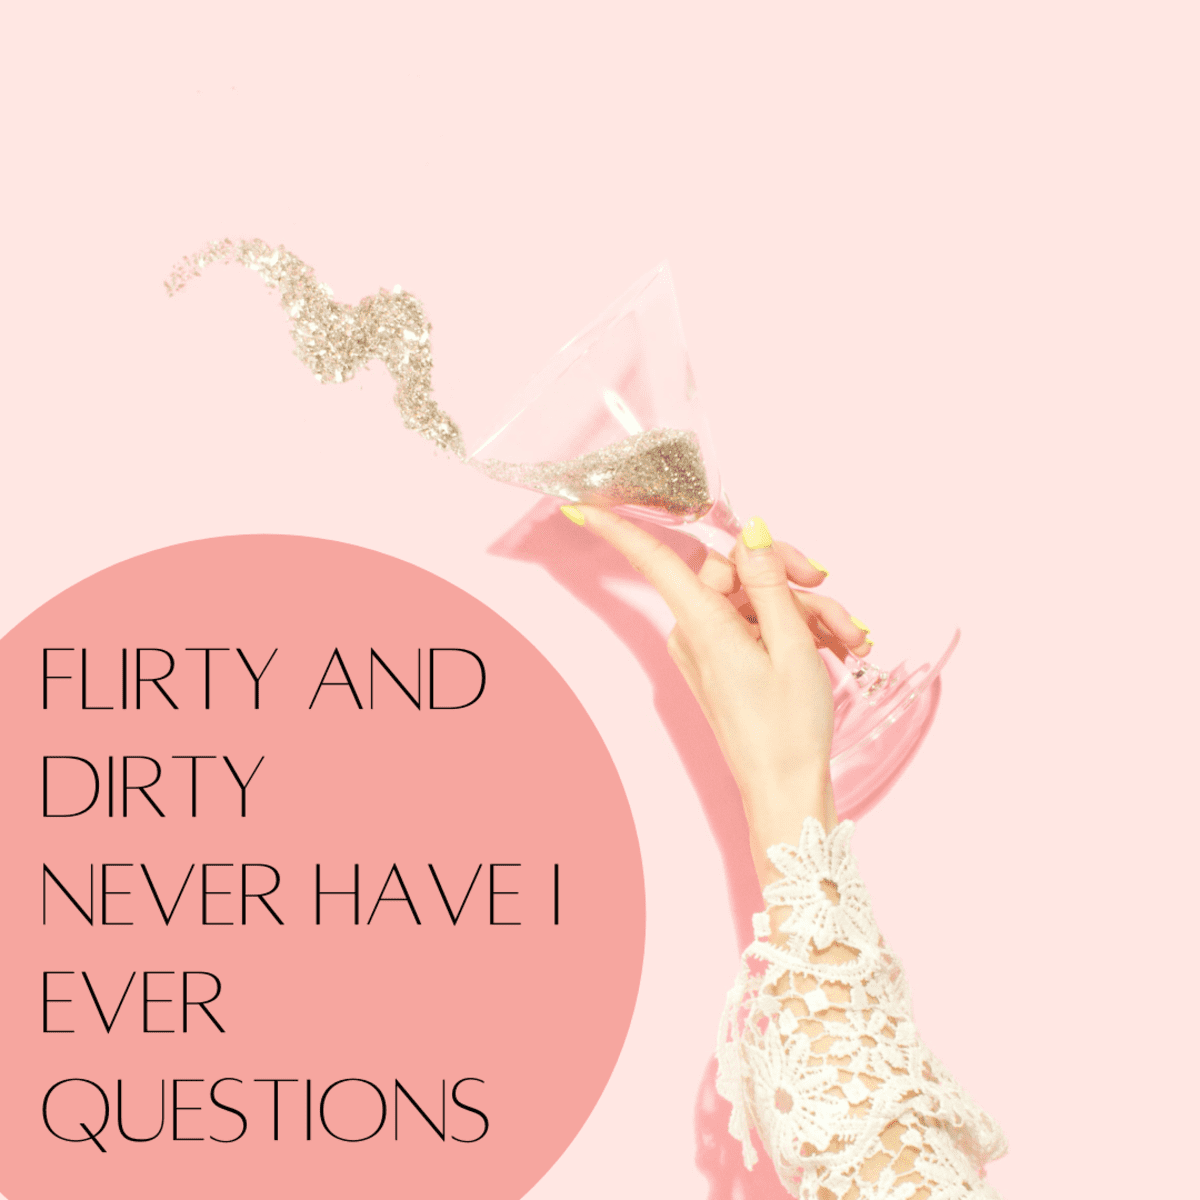 100+ Dirty Never Have I Ever Questions - PairedLife